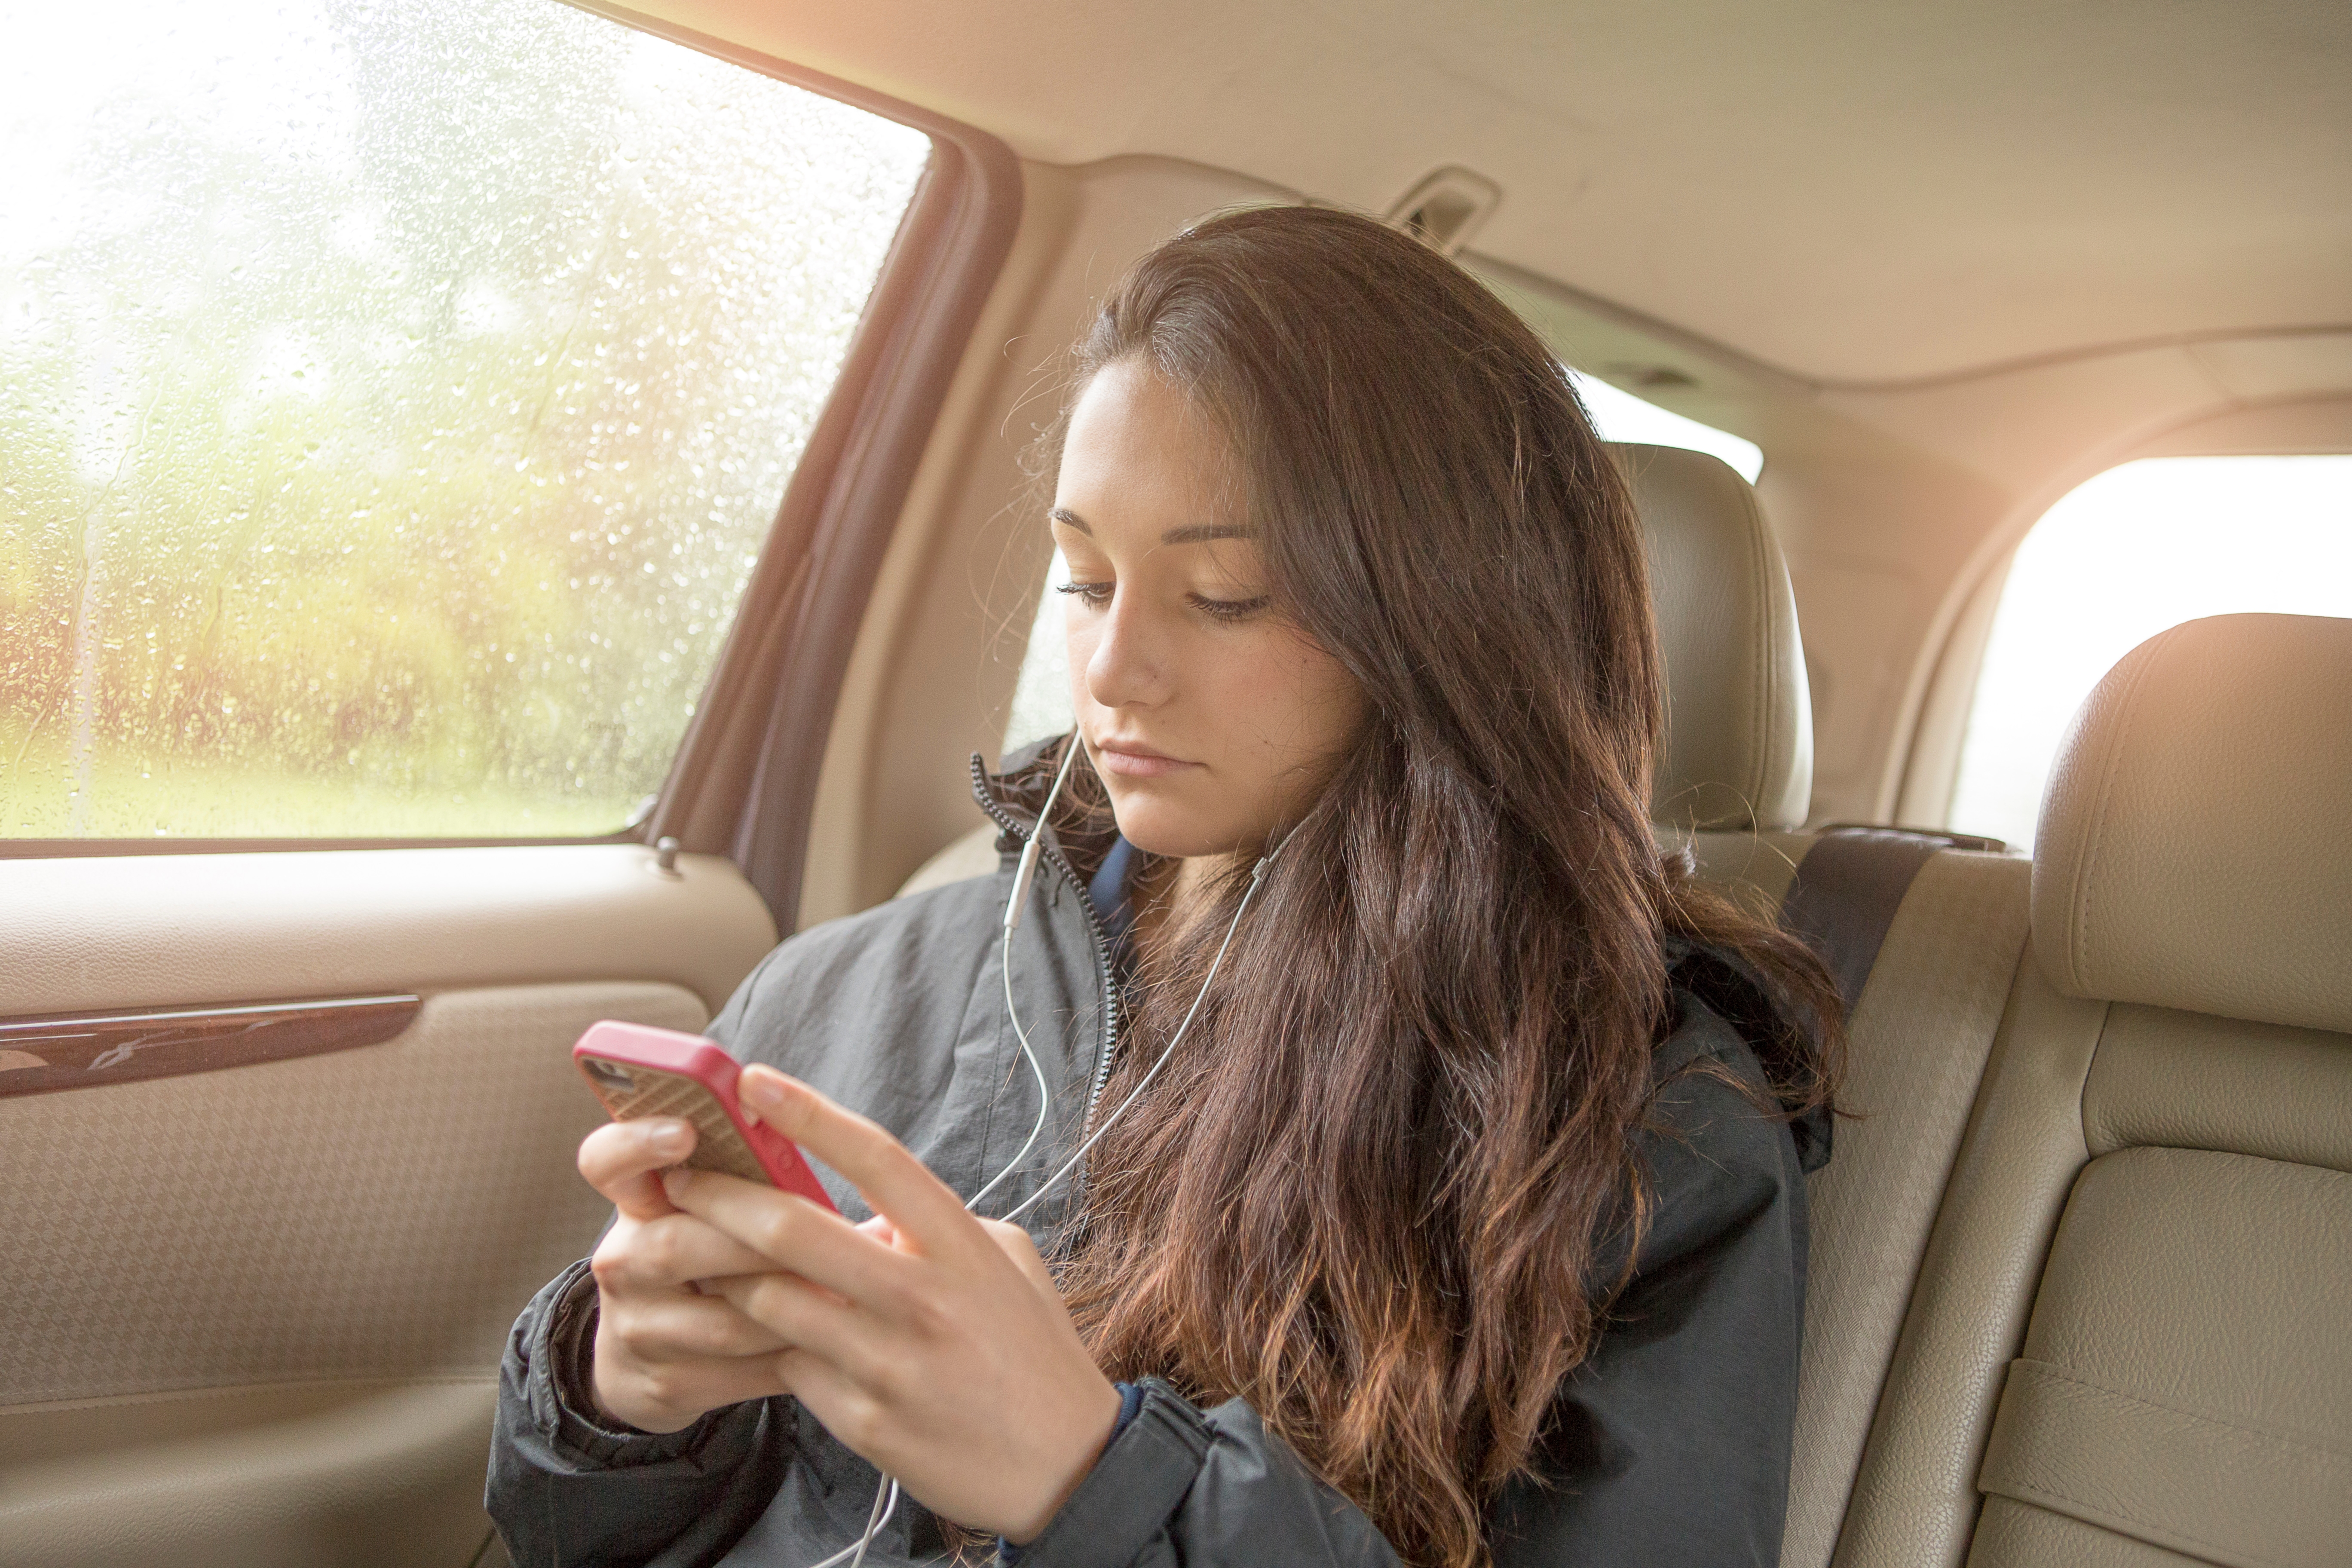 Sullen teenage girl selecting smartphone music in car back seat | Sources: Getty Images